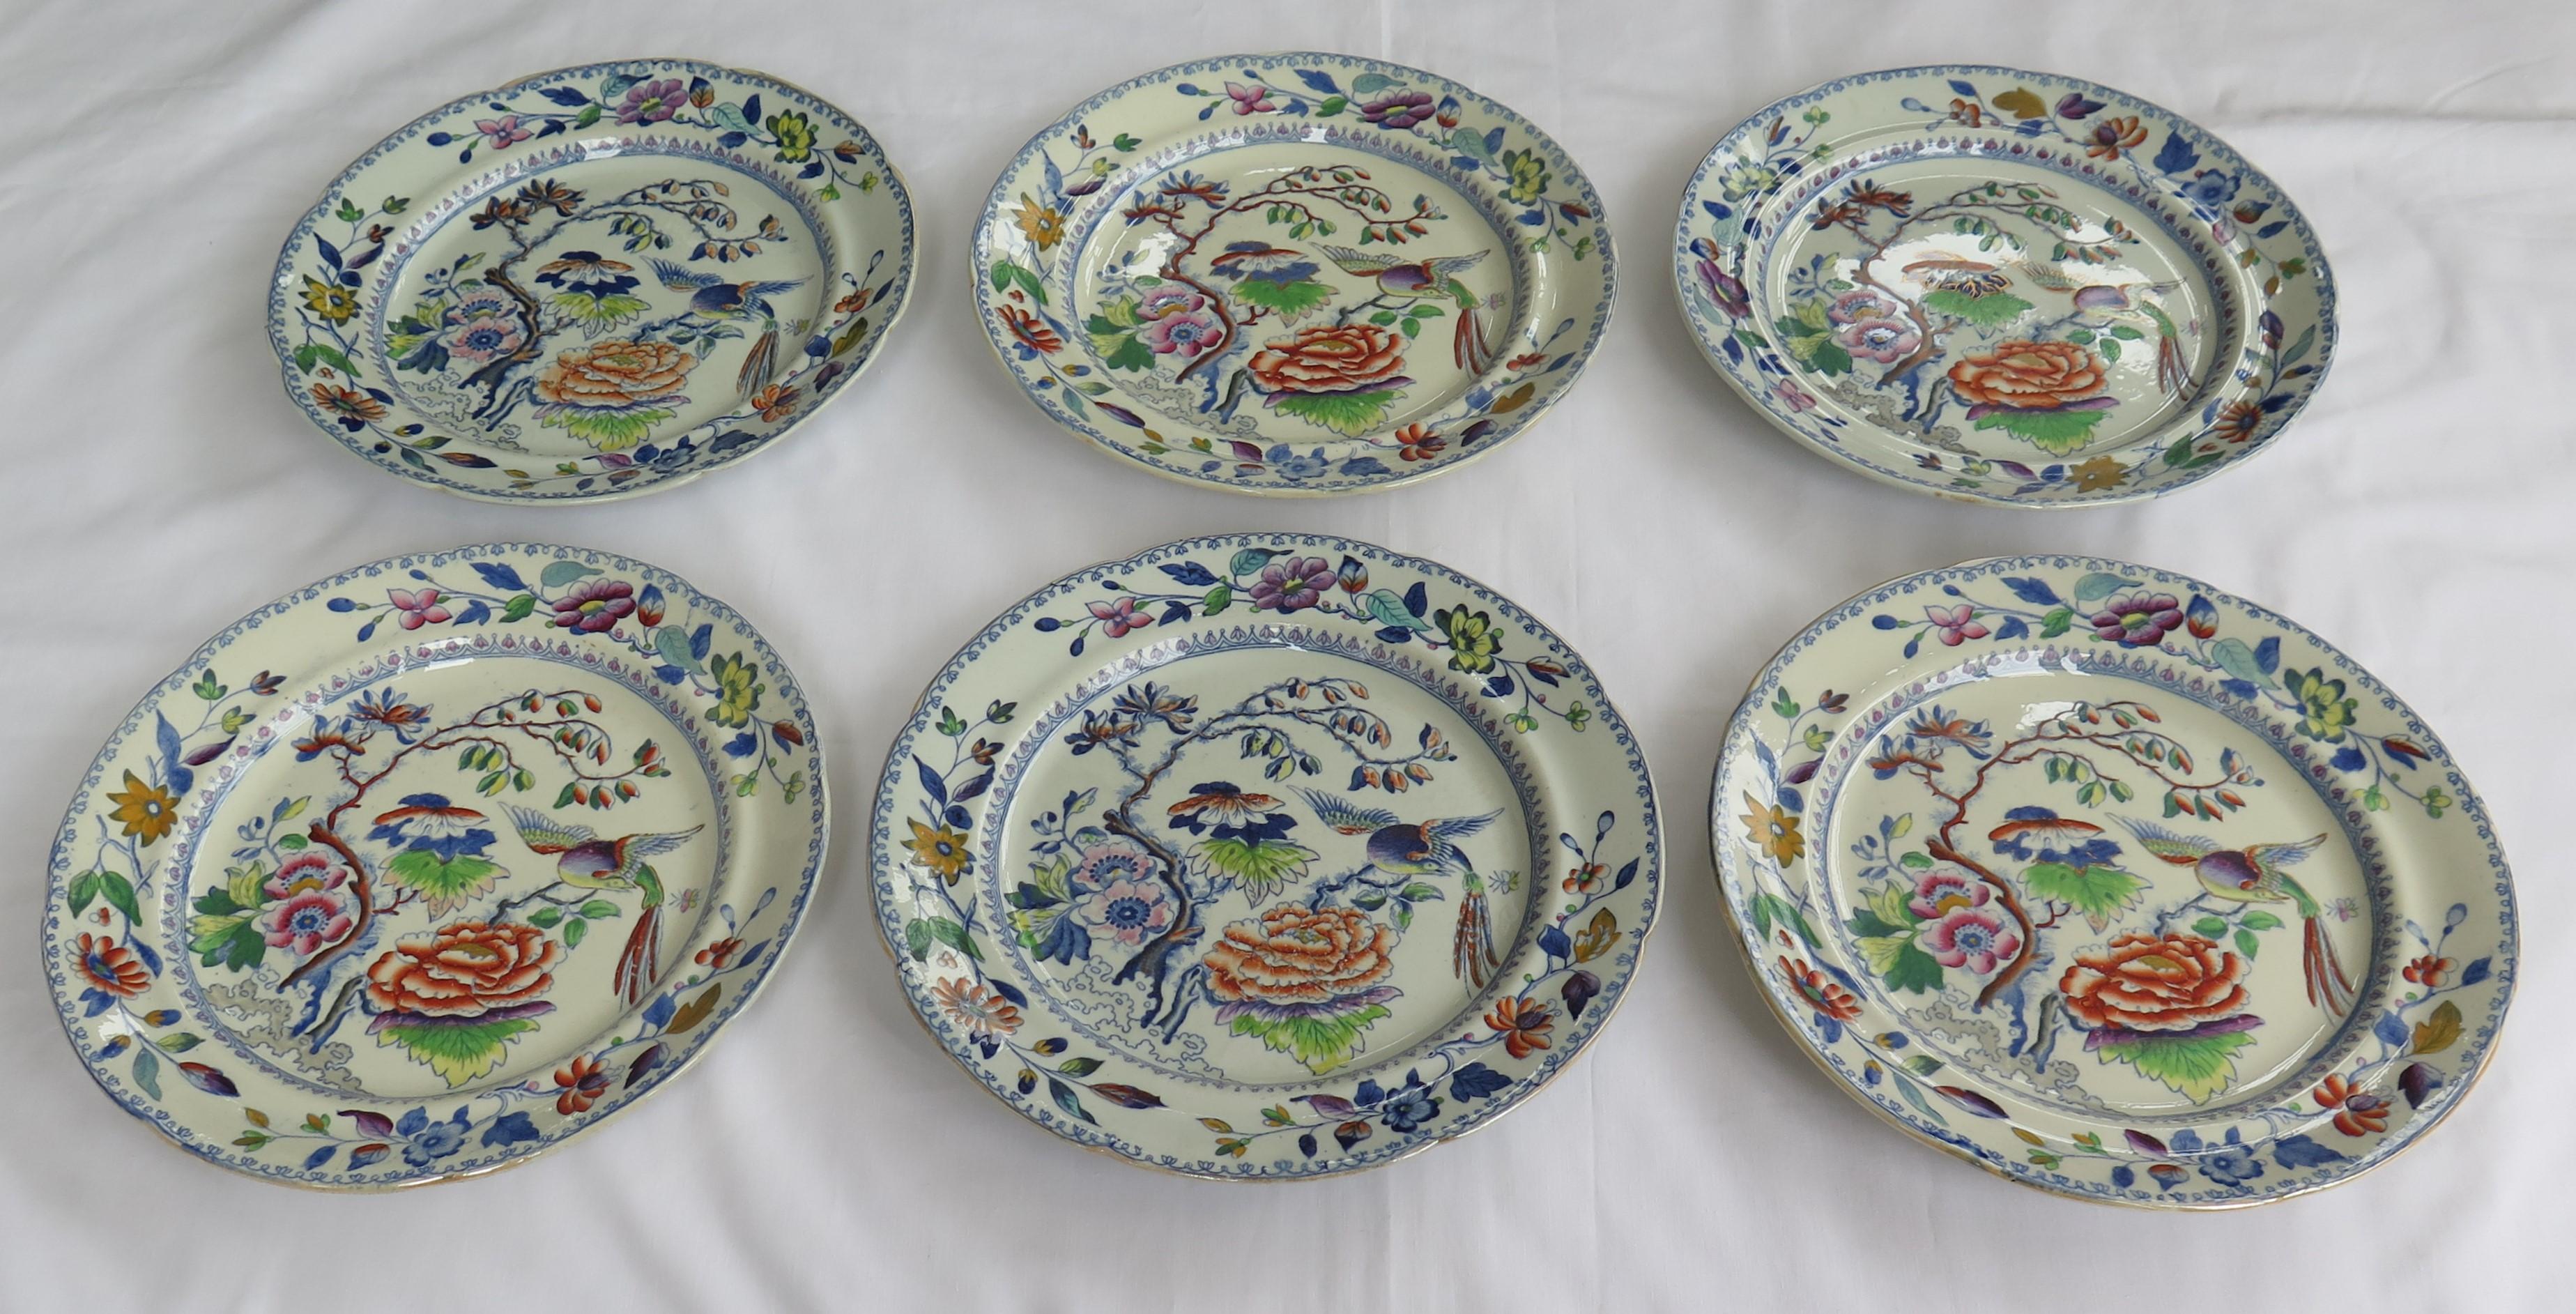 This is a good early hand painted ironstone (stone china) set of six dinner plates, made by William Davenport and Co., Longport, Staffordshire Potteries, England, George 111rd period, circa 1815.

The plates are well potted and hand painted,